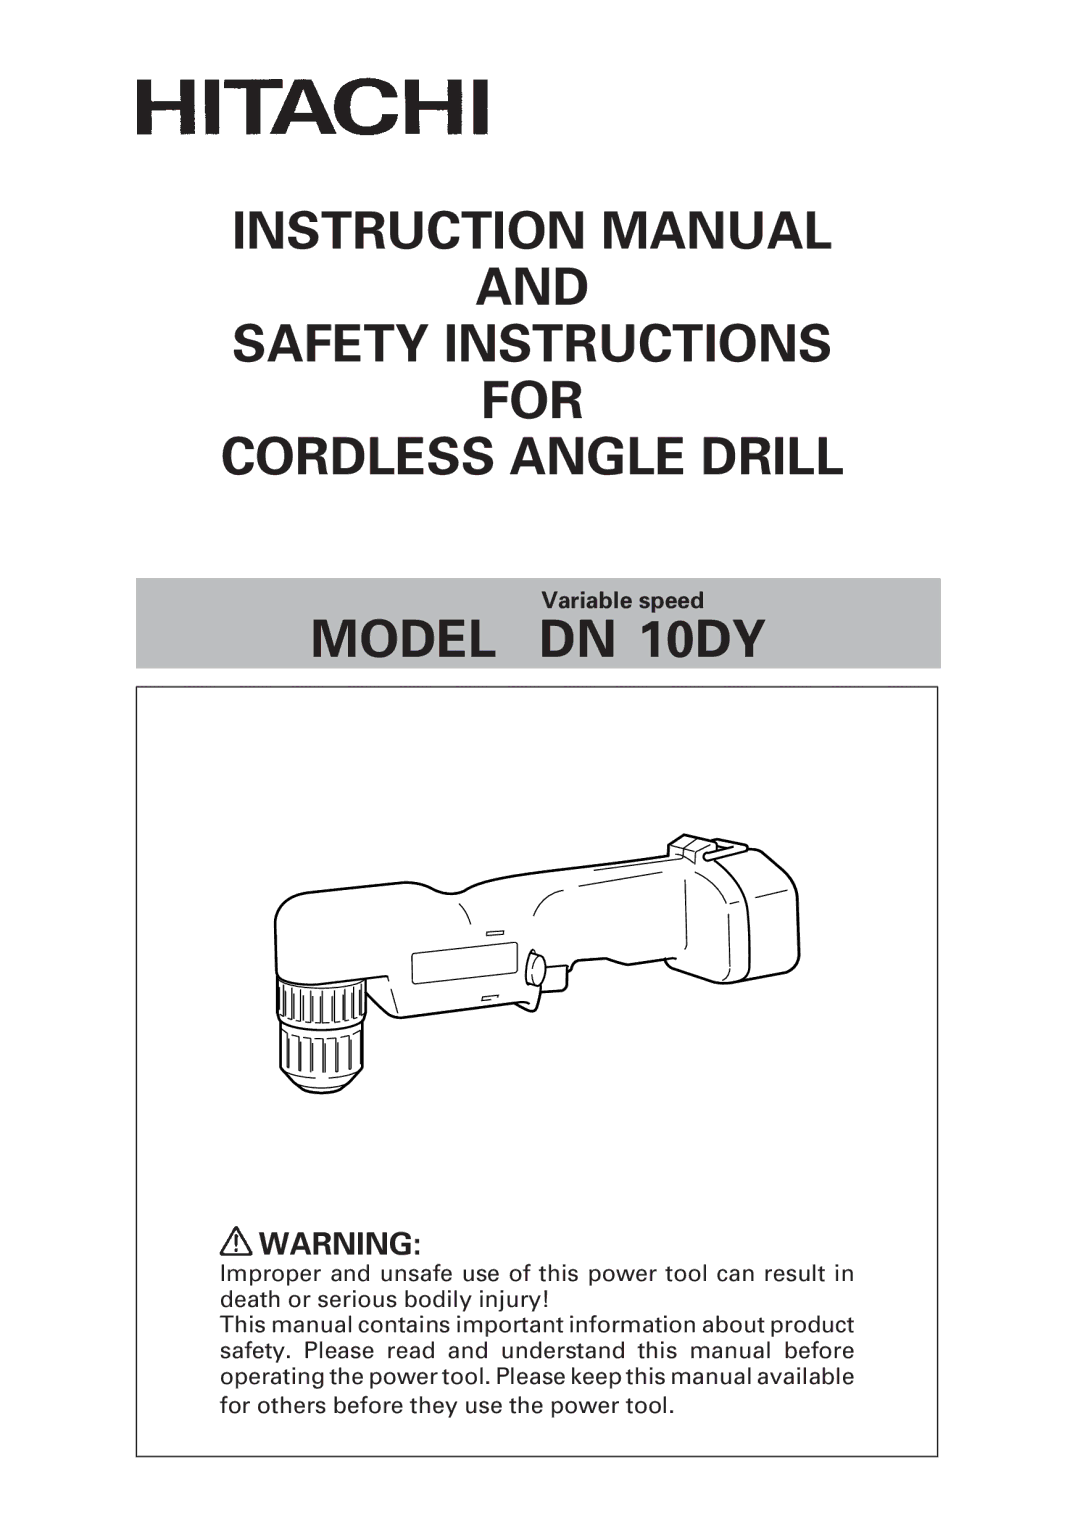 Honeywell DN 10DY instruction manual Safety Instructions For Cordless Angle Drill 